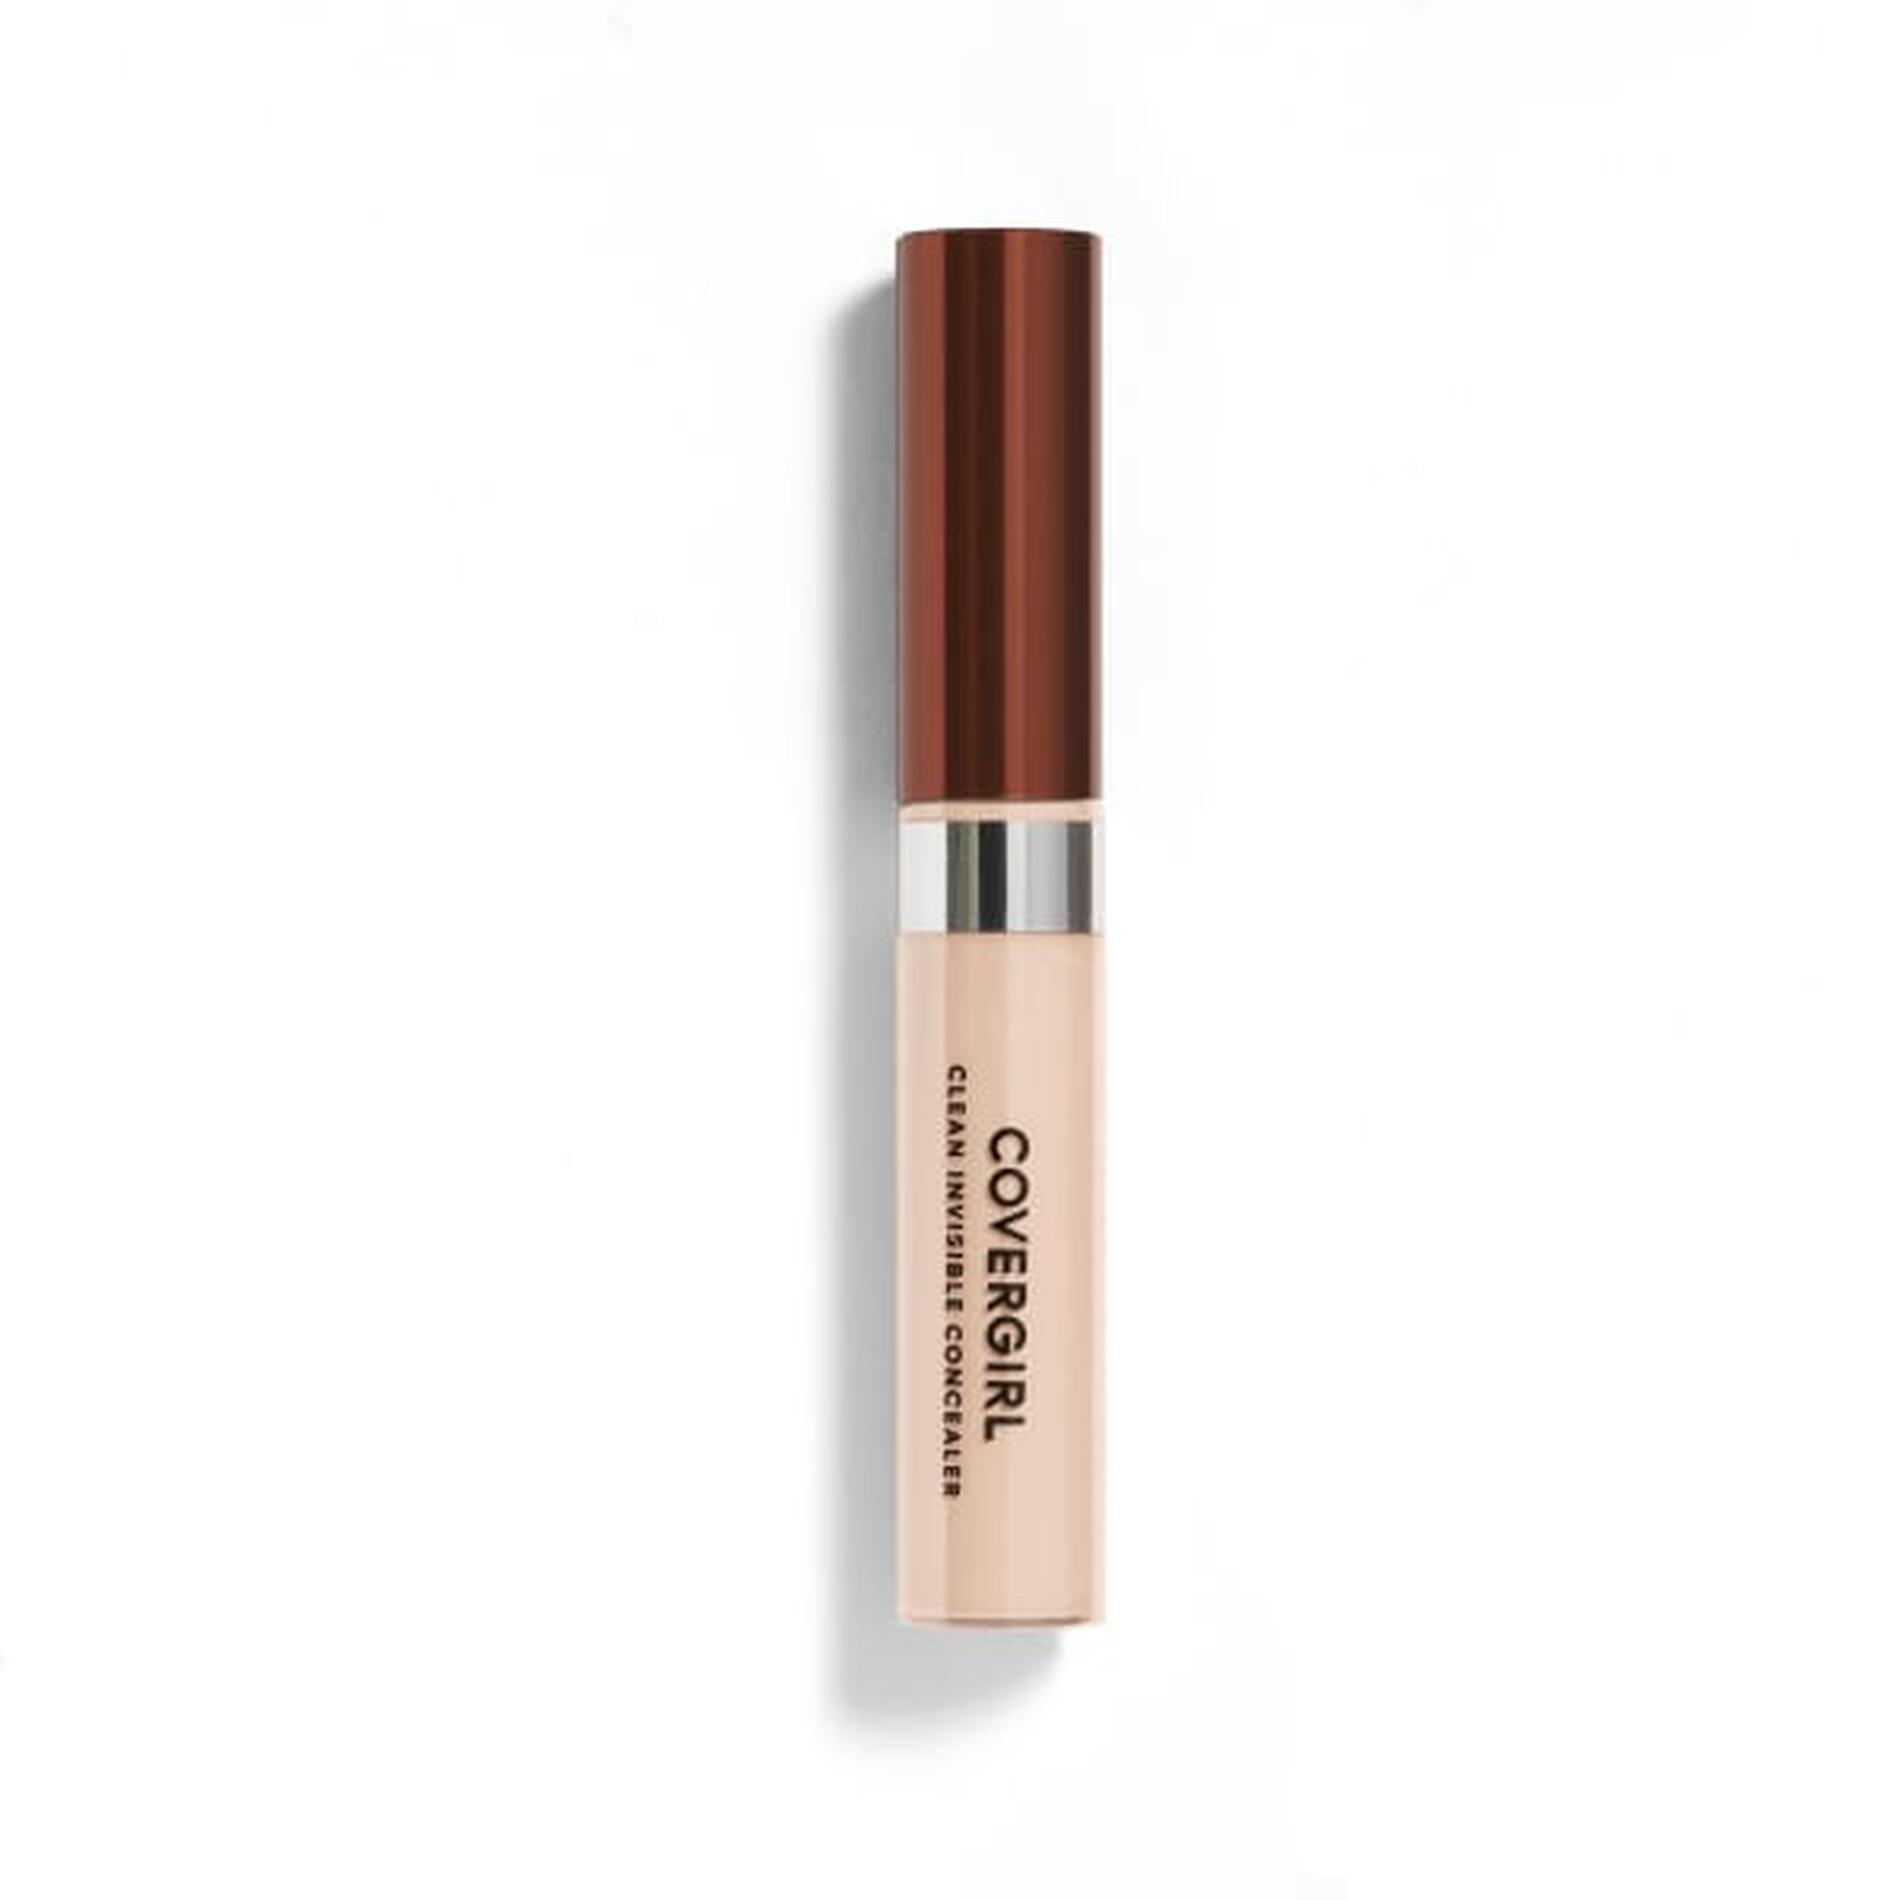 Covergirl Clean Invisible Concealer – Light